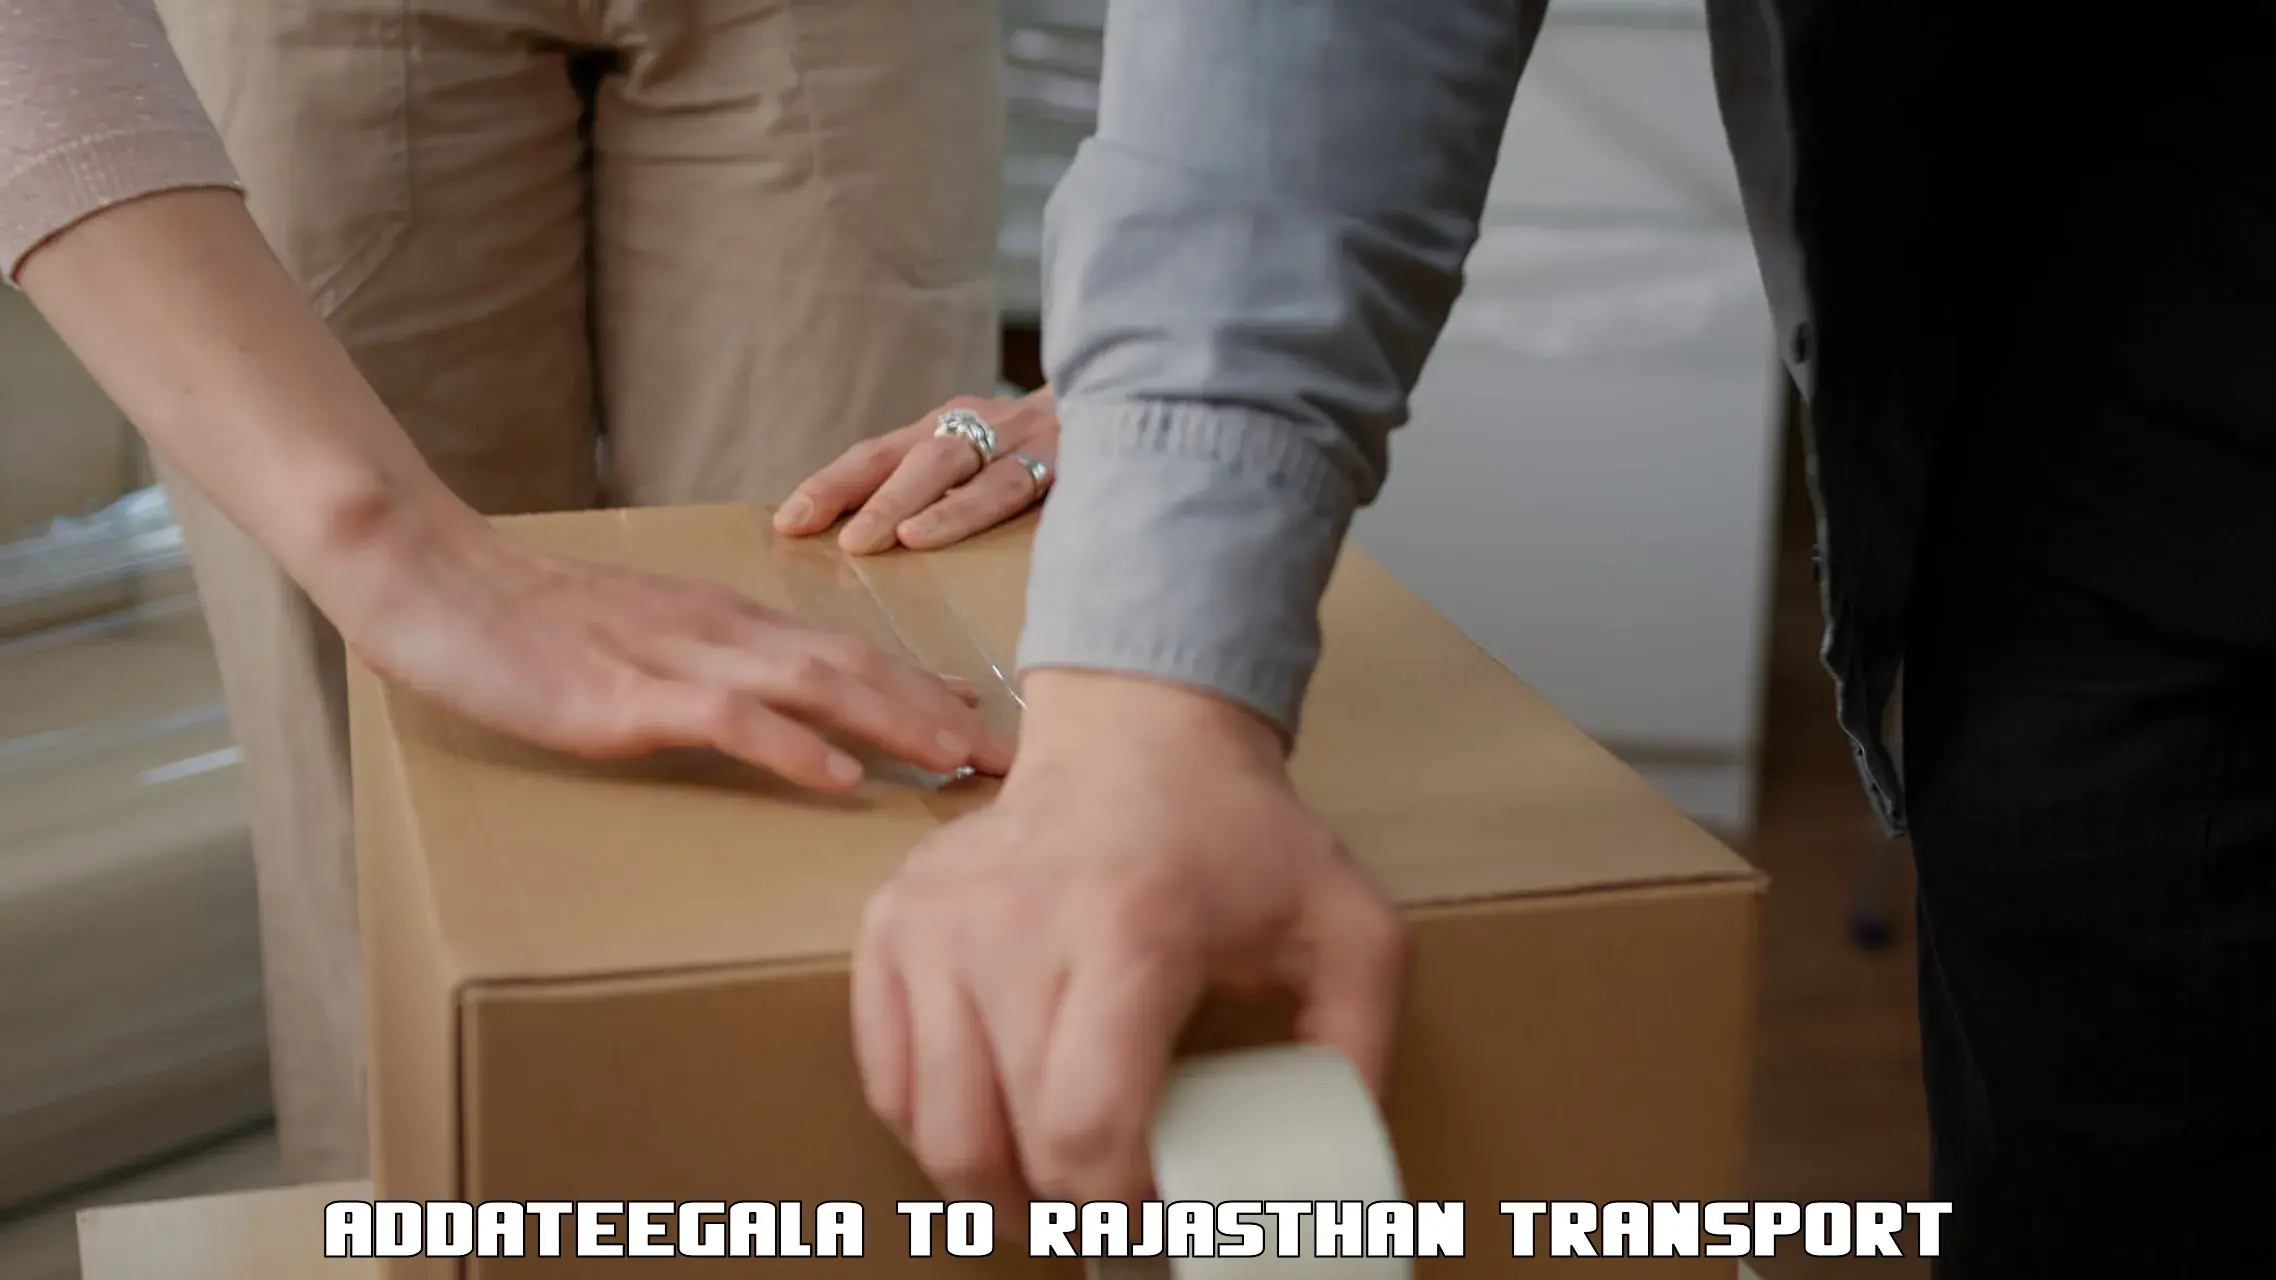 Goods transport services Addateegala to Ajeetgarh